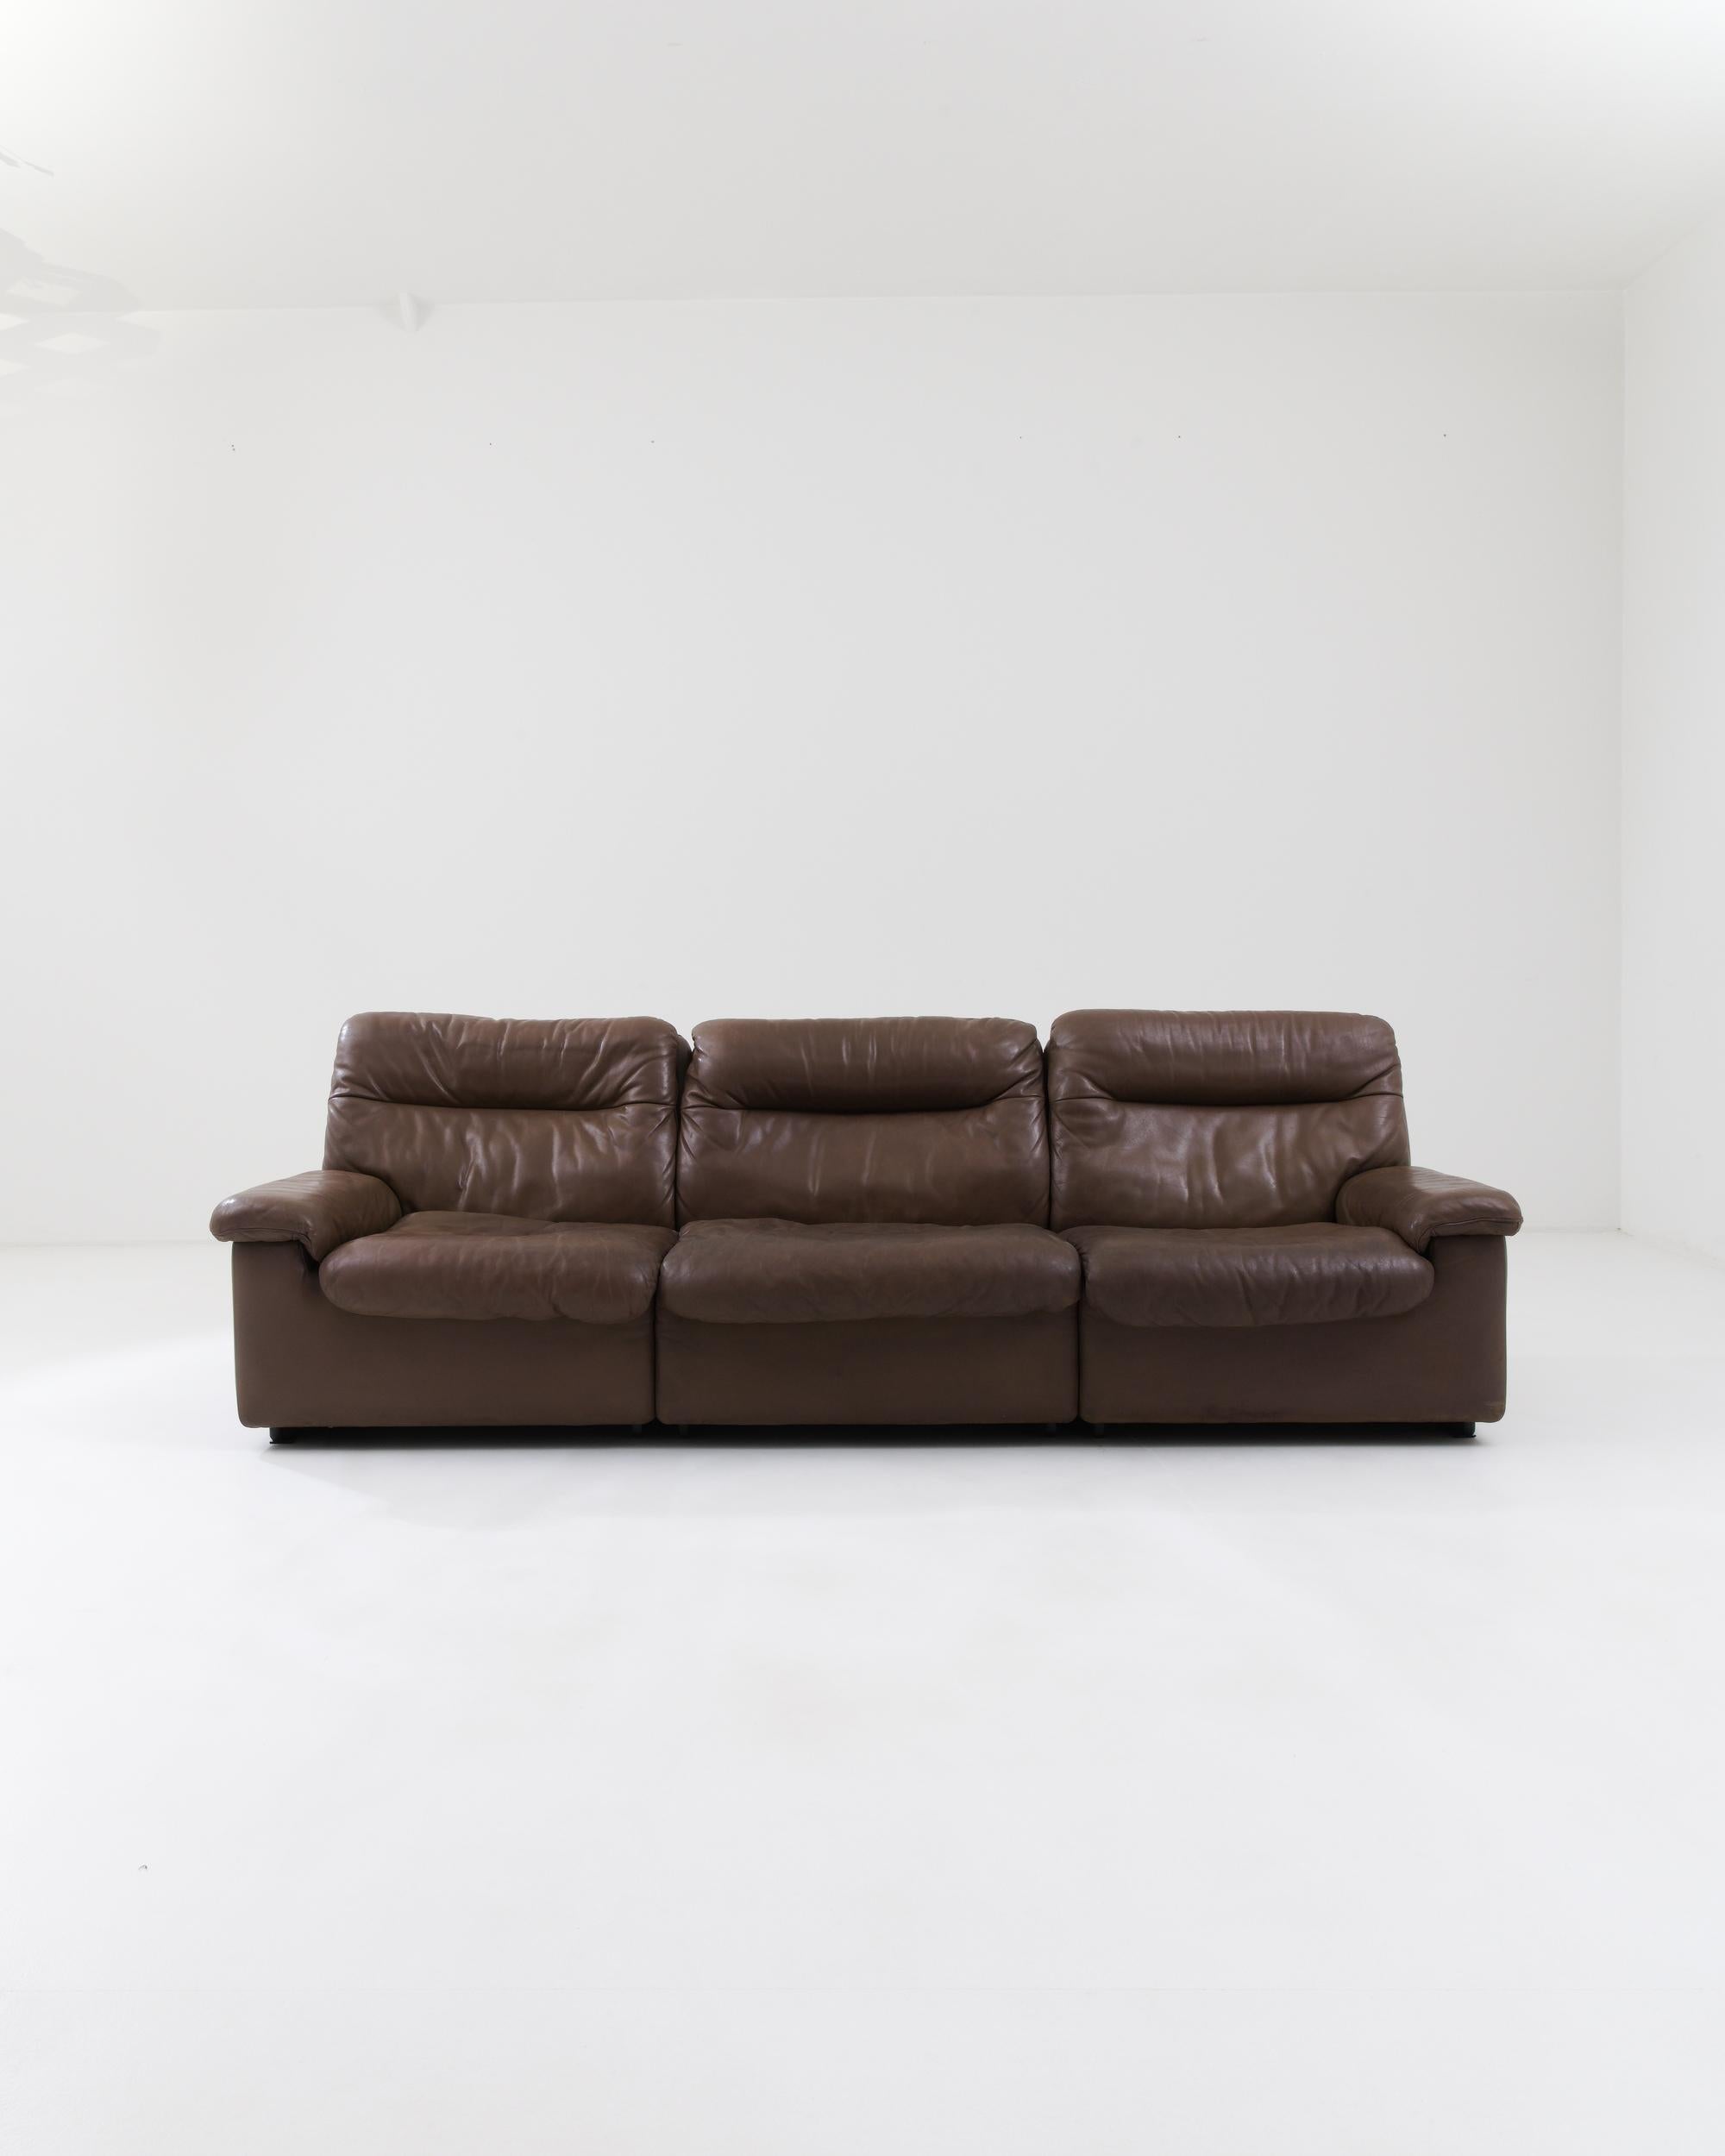 A leather sofa created in 1970s Switzerland. This marvelous leather sofa was made by De Sede, a furniture maker who has been renowned for over fifty years of ground-breaking handcrafted leather pieces. The rich brown leather and extra wide,